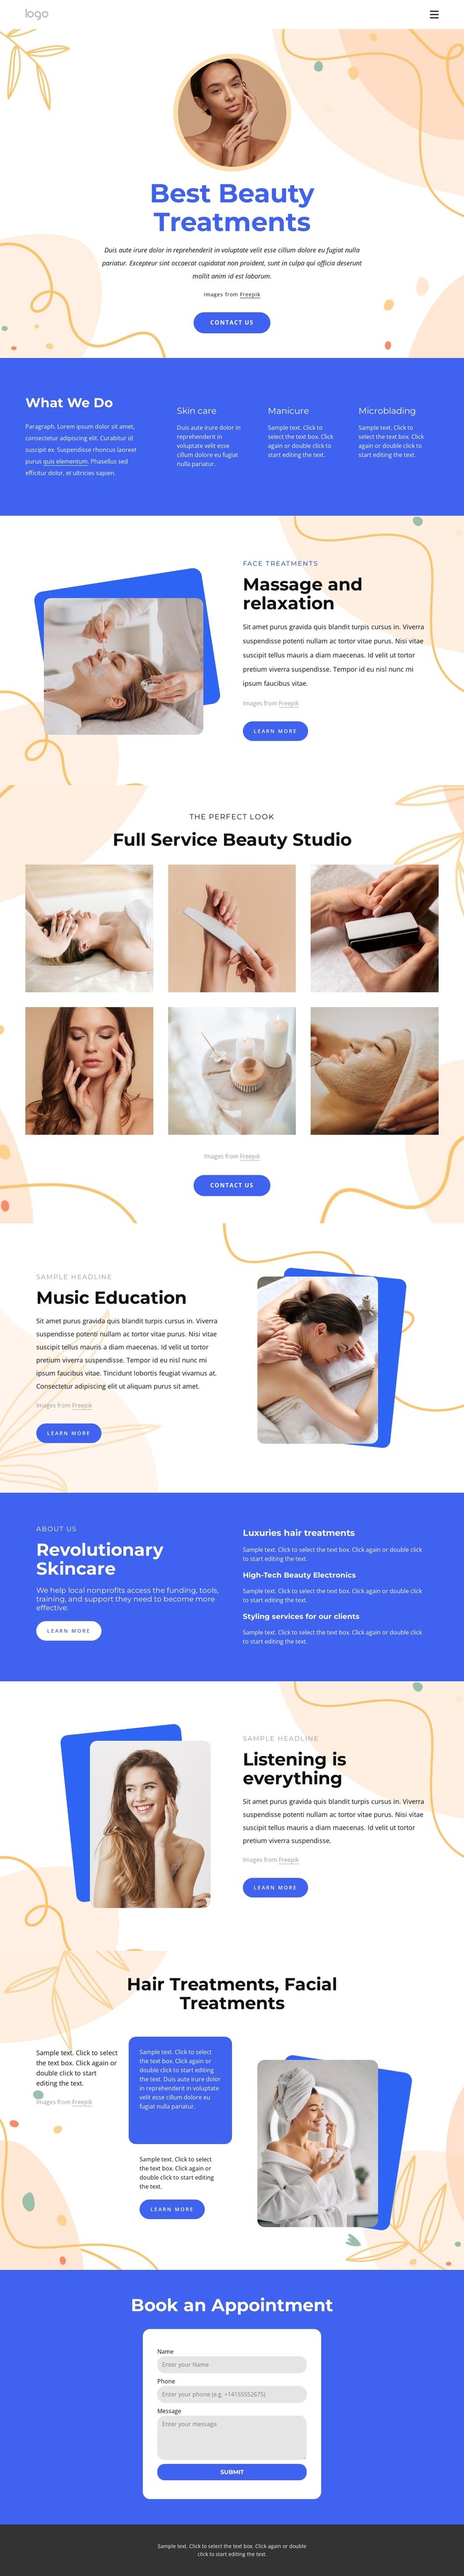 Our beauty treatments CSS Template